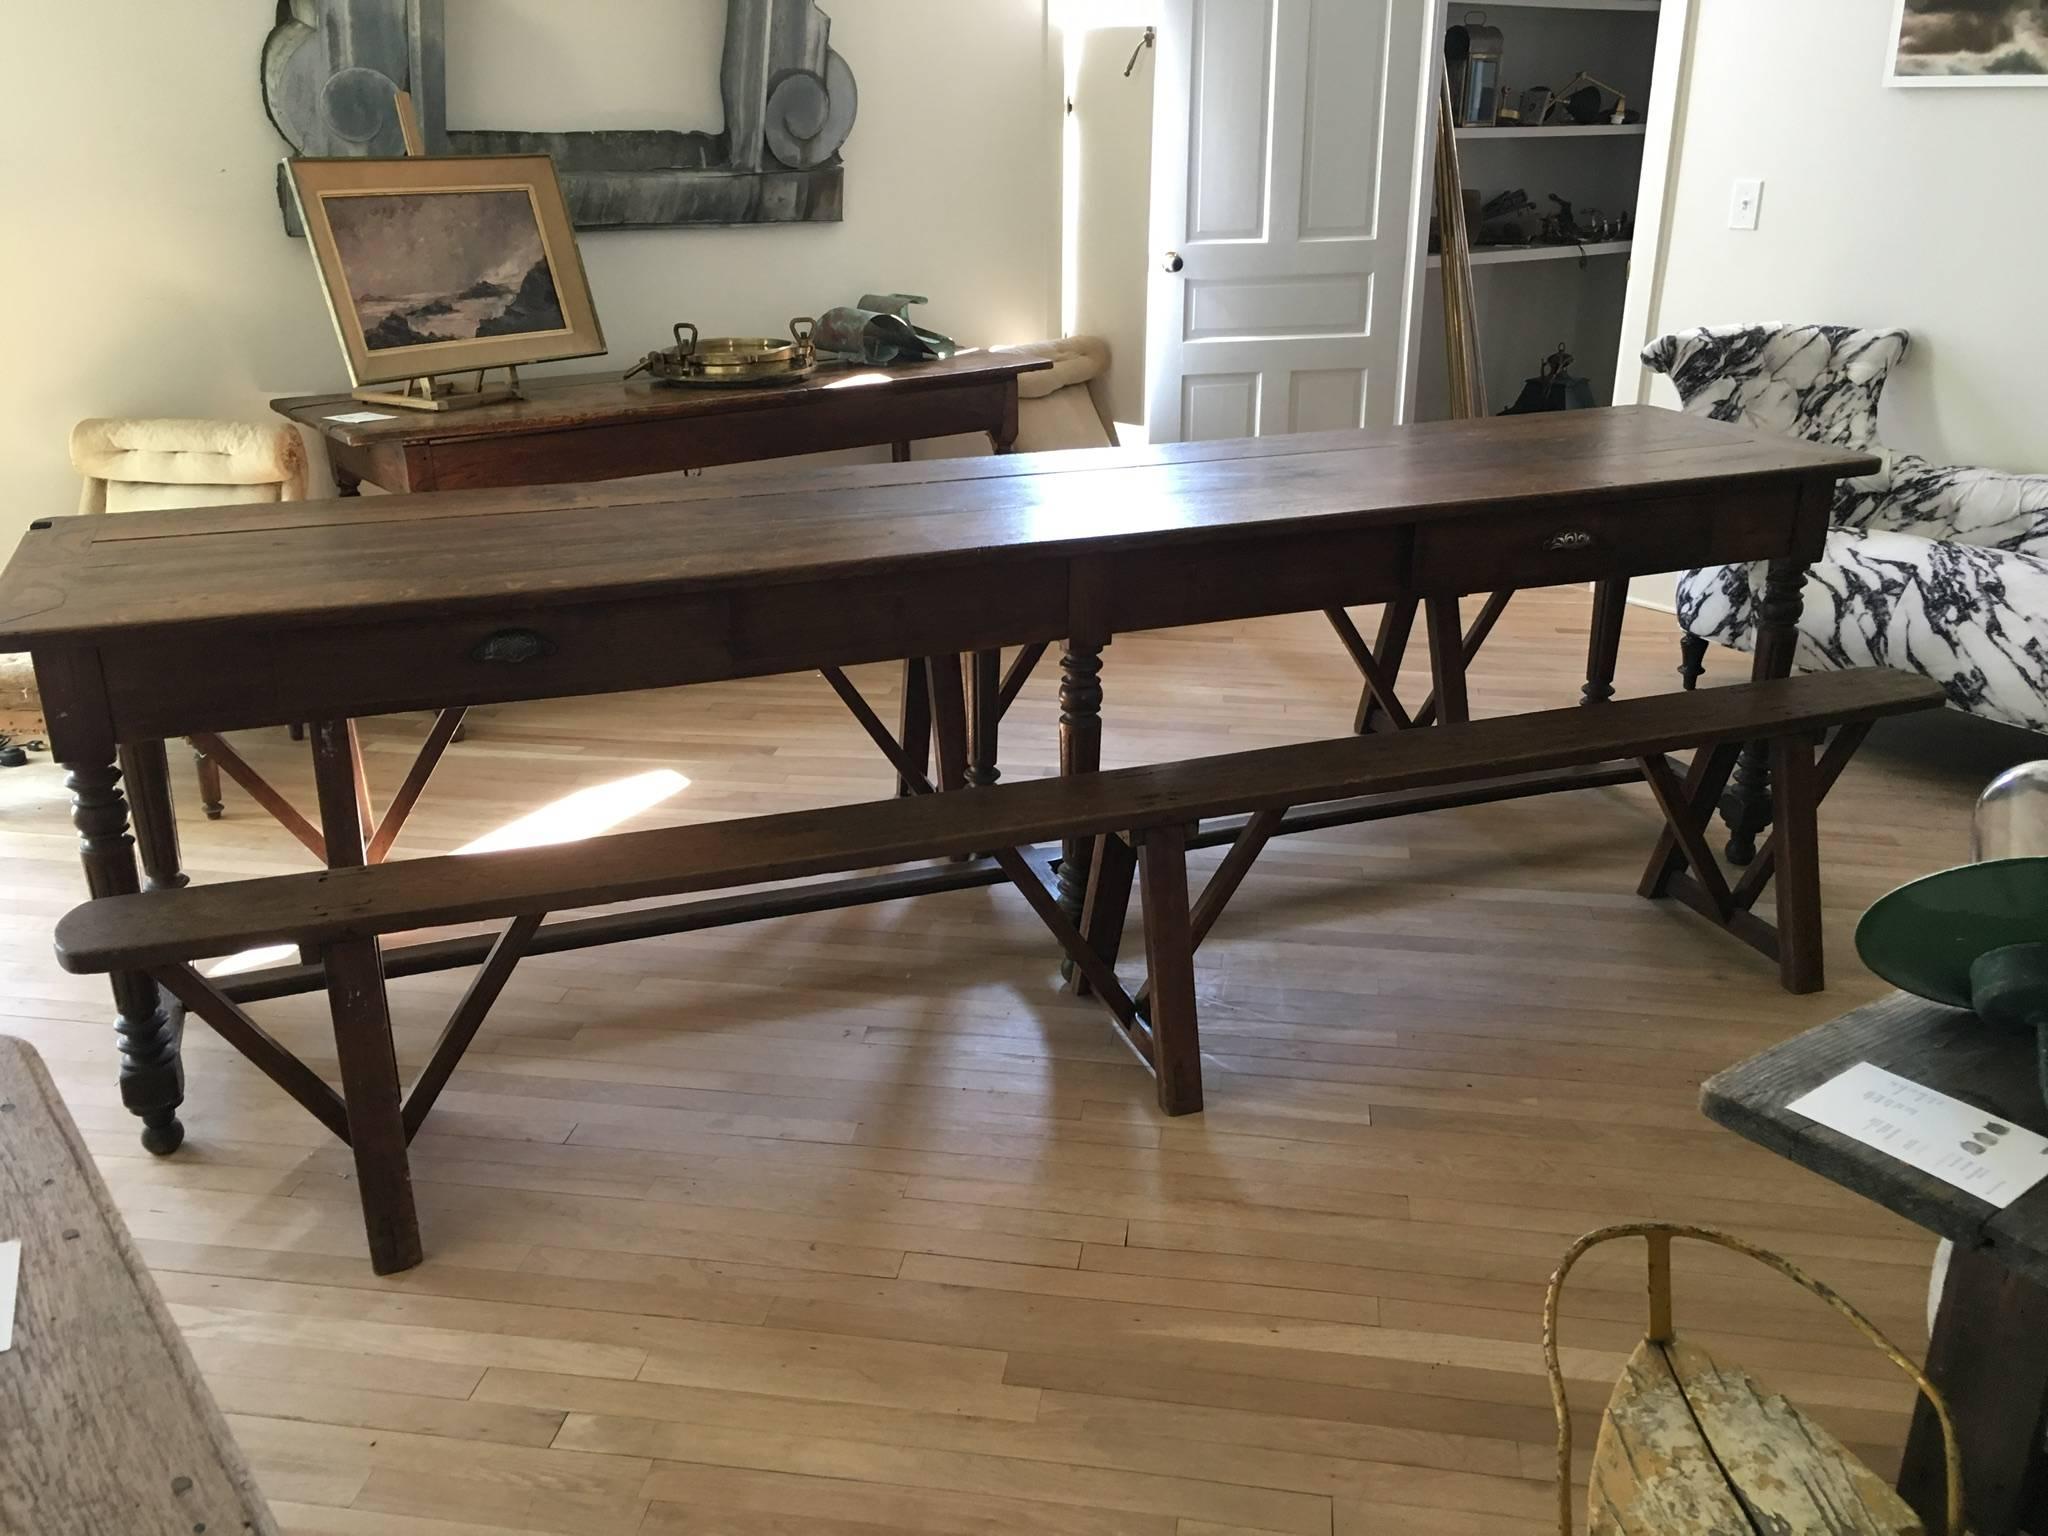 Very long French oak refectory table with center stretcher and two trestle benches. Beautiful patina, lines and craftsmanship. Two drawers with original carved metal cup pulls. At the end of the table is a steel reinforced notch and hook possibly